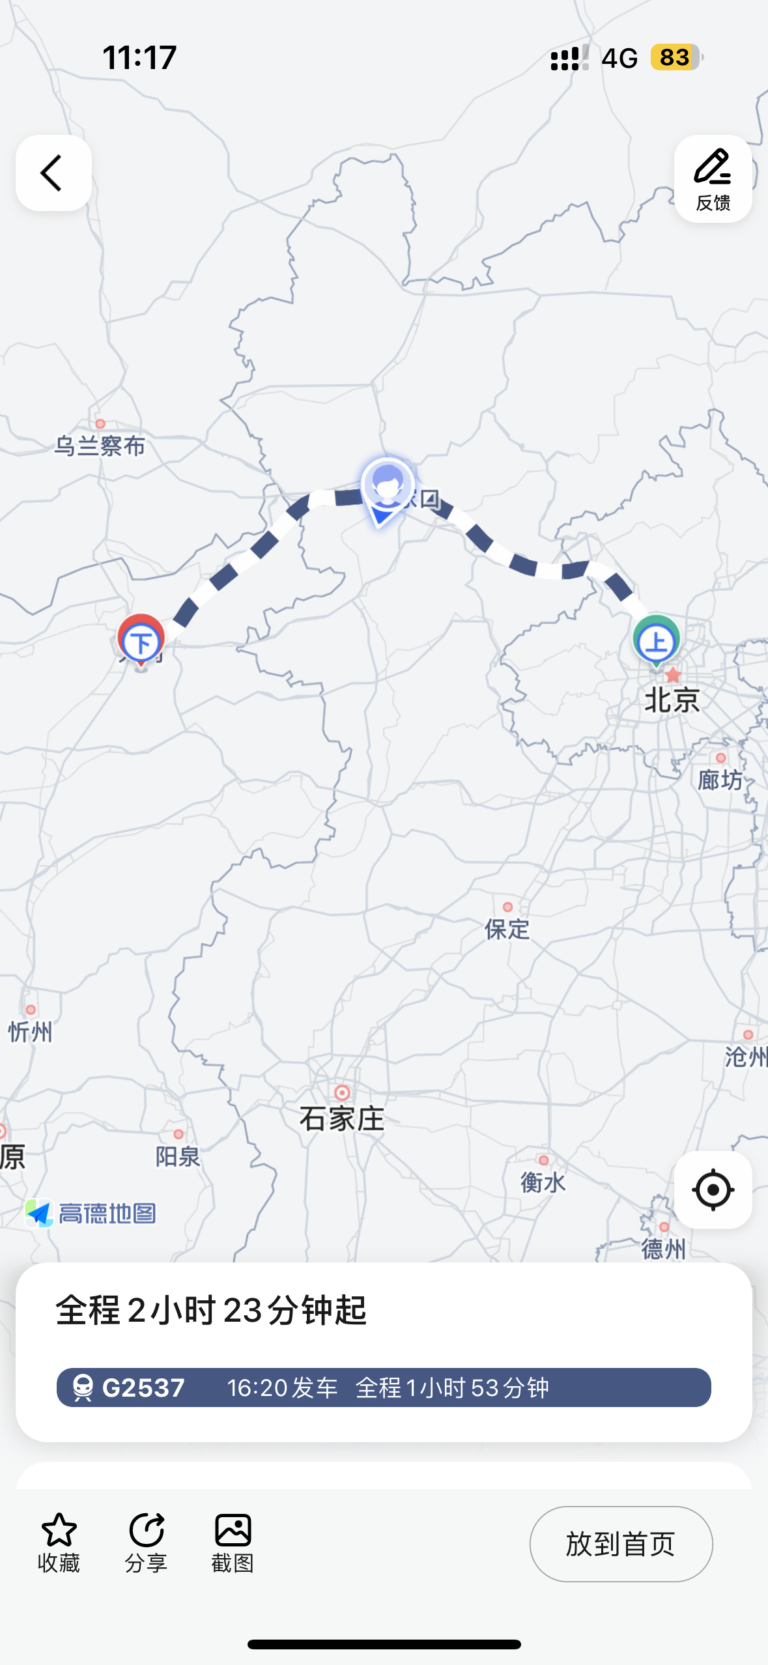 This is the train journey from Beijing to Datong when zooming in.